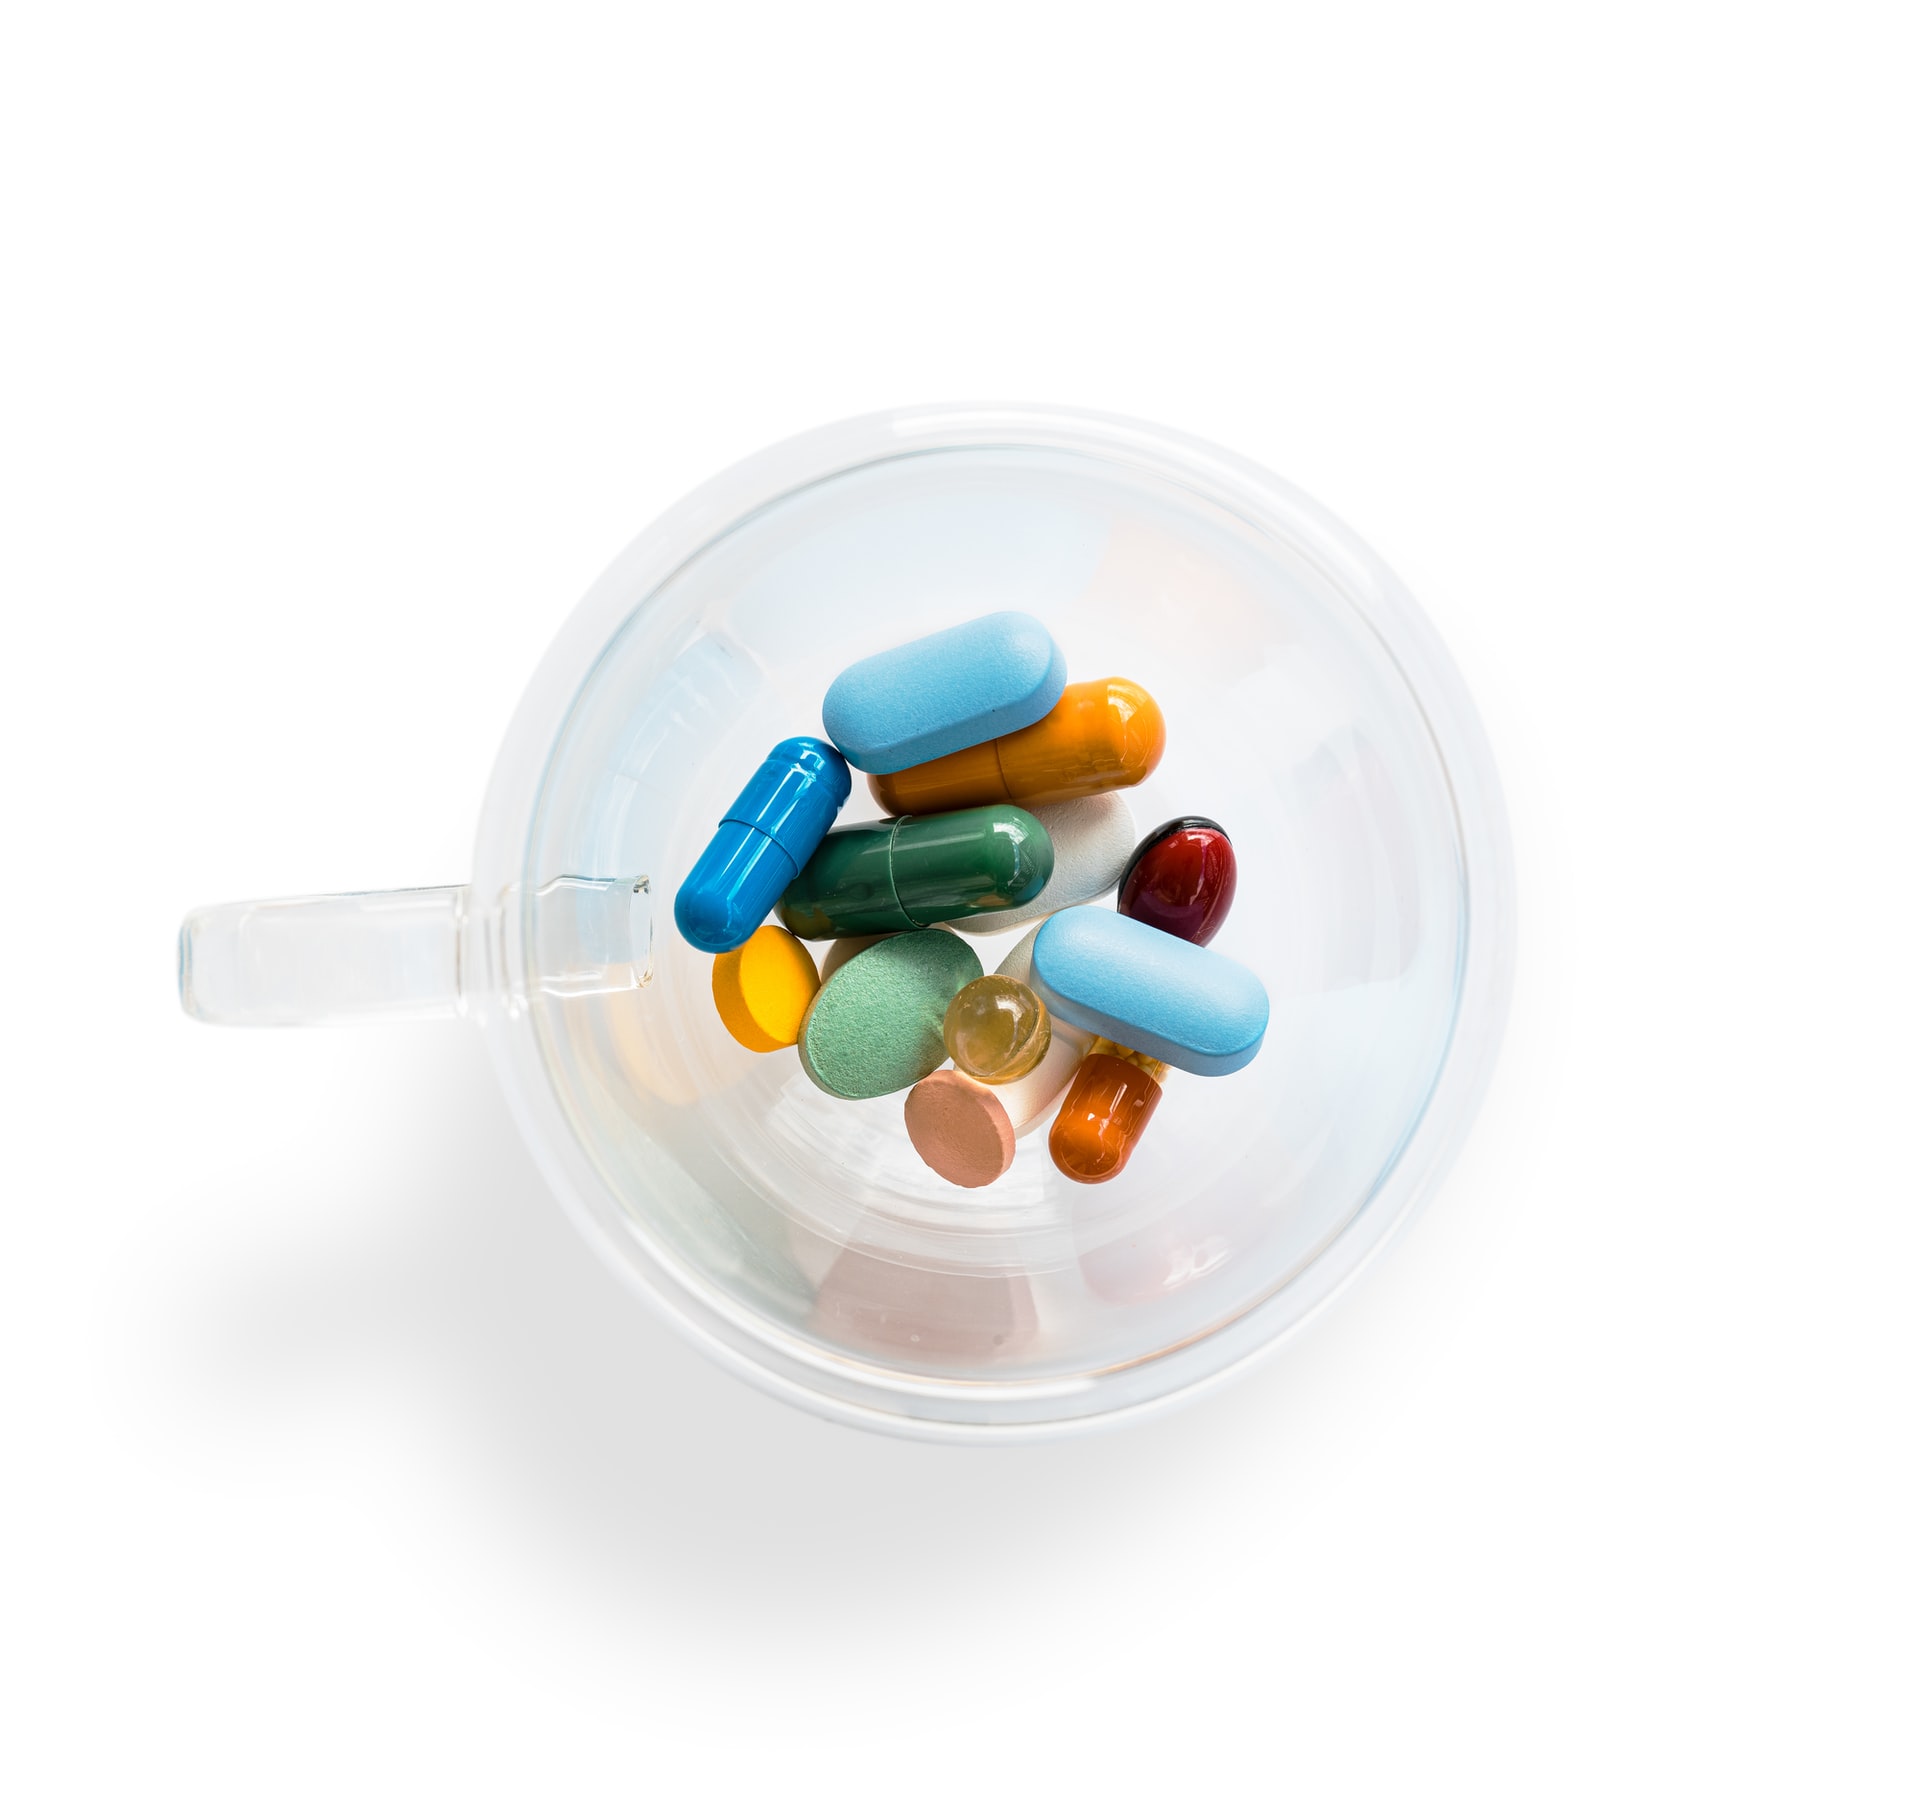 health-care-antipsychotic-medications-court-attorney-Wellesley-MA-02481